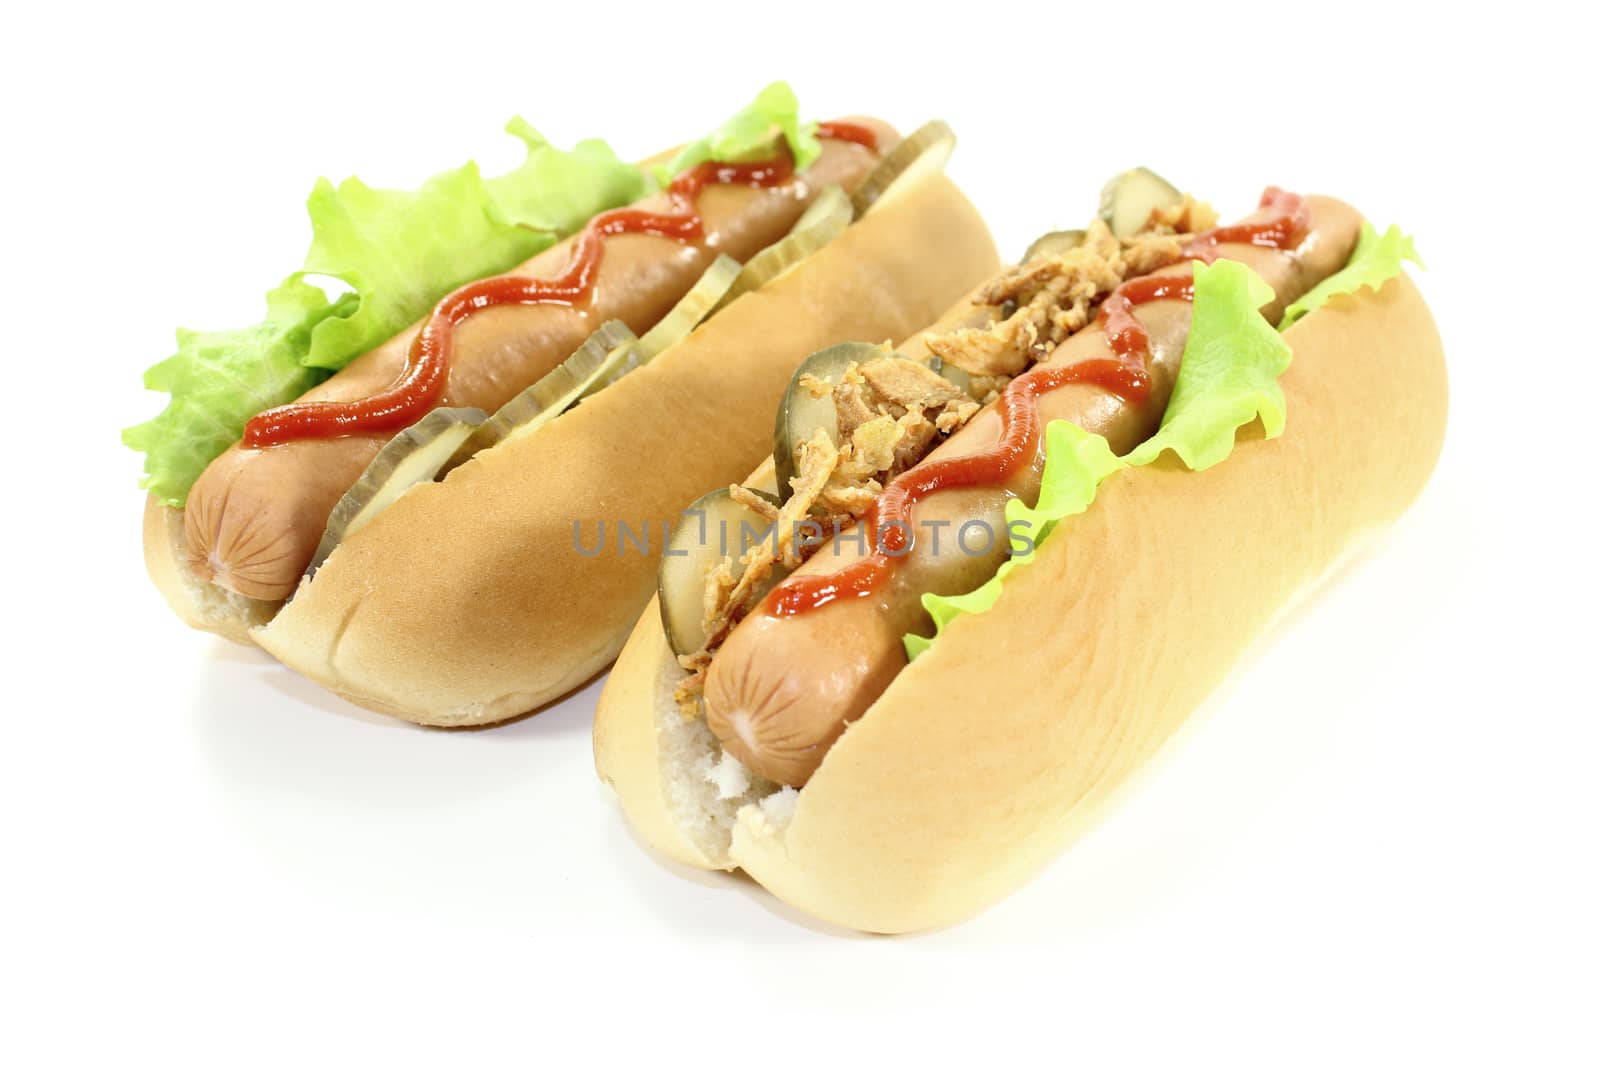 Hot dogs with ketchup and fried onions by discovery